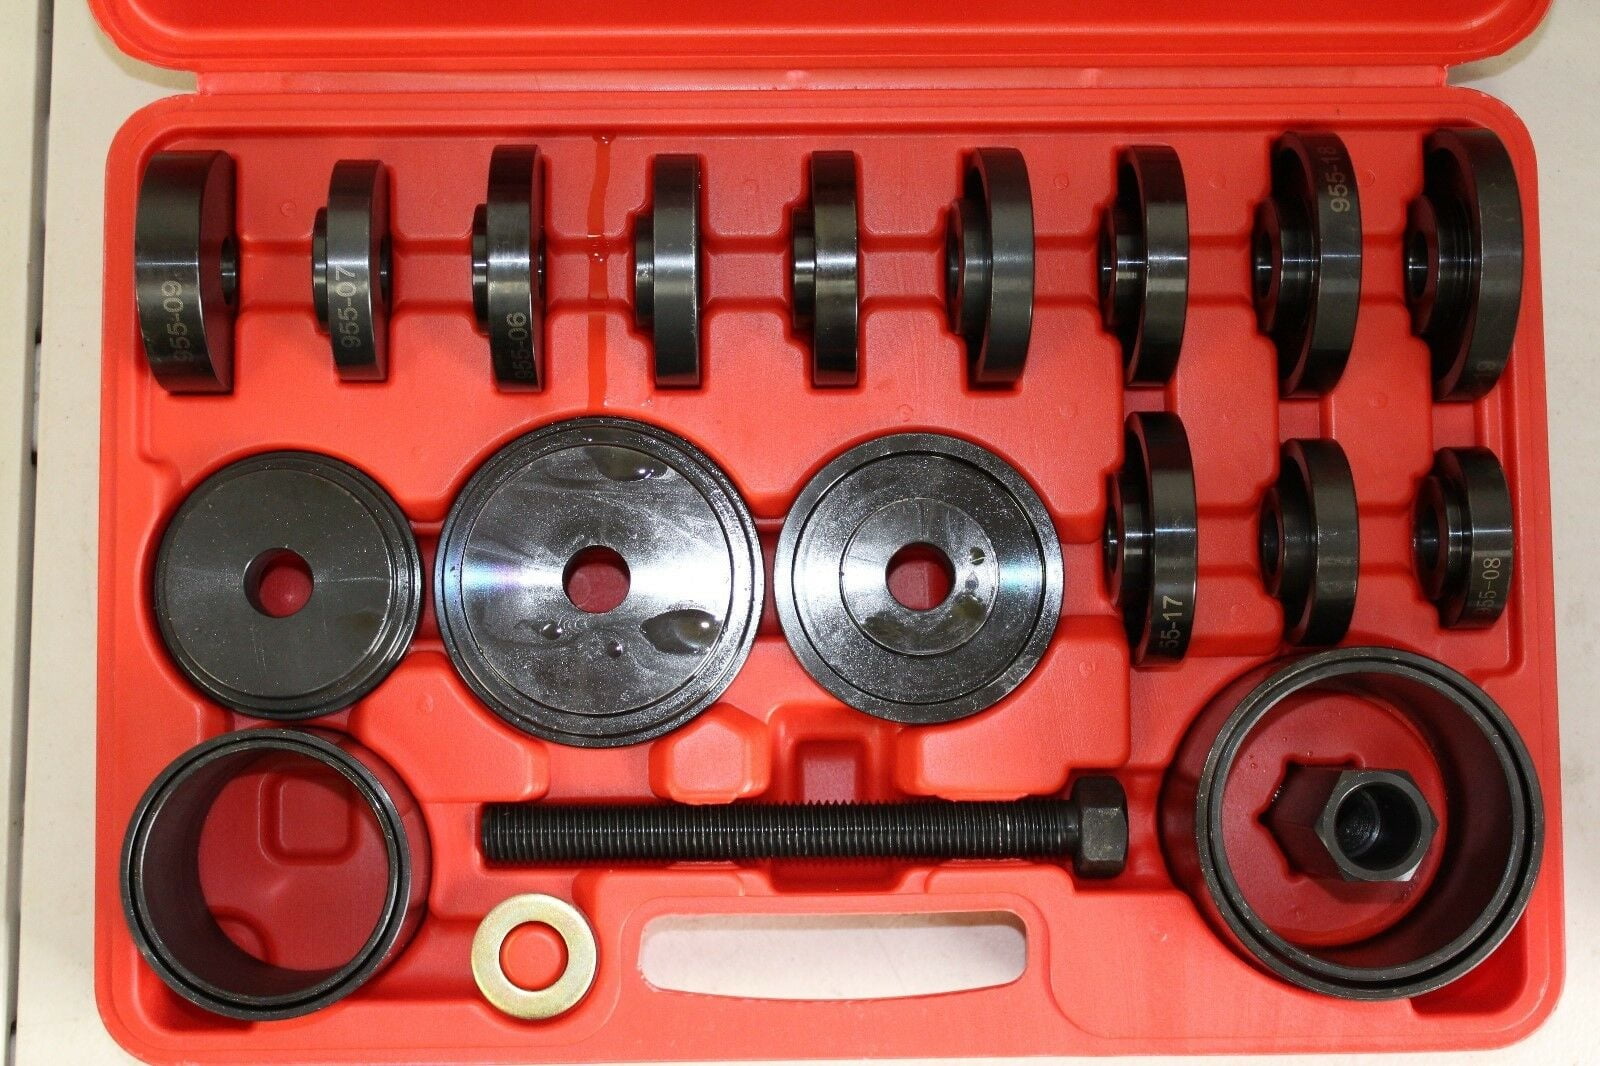 31x Front Wheel Drive Bearing Removal & Installation Tools Universal 50-83MM UPS 